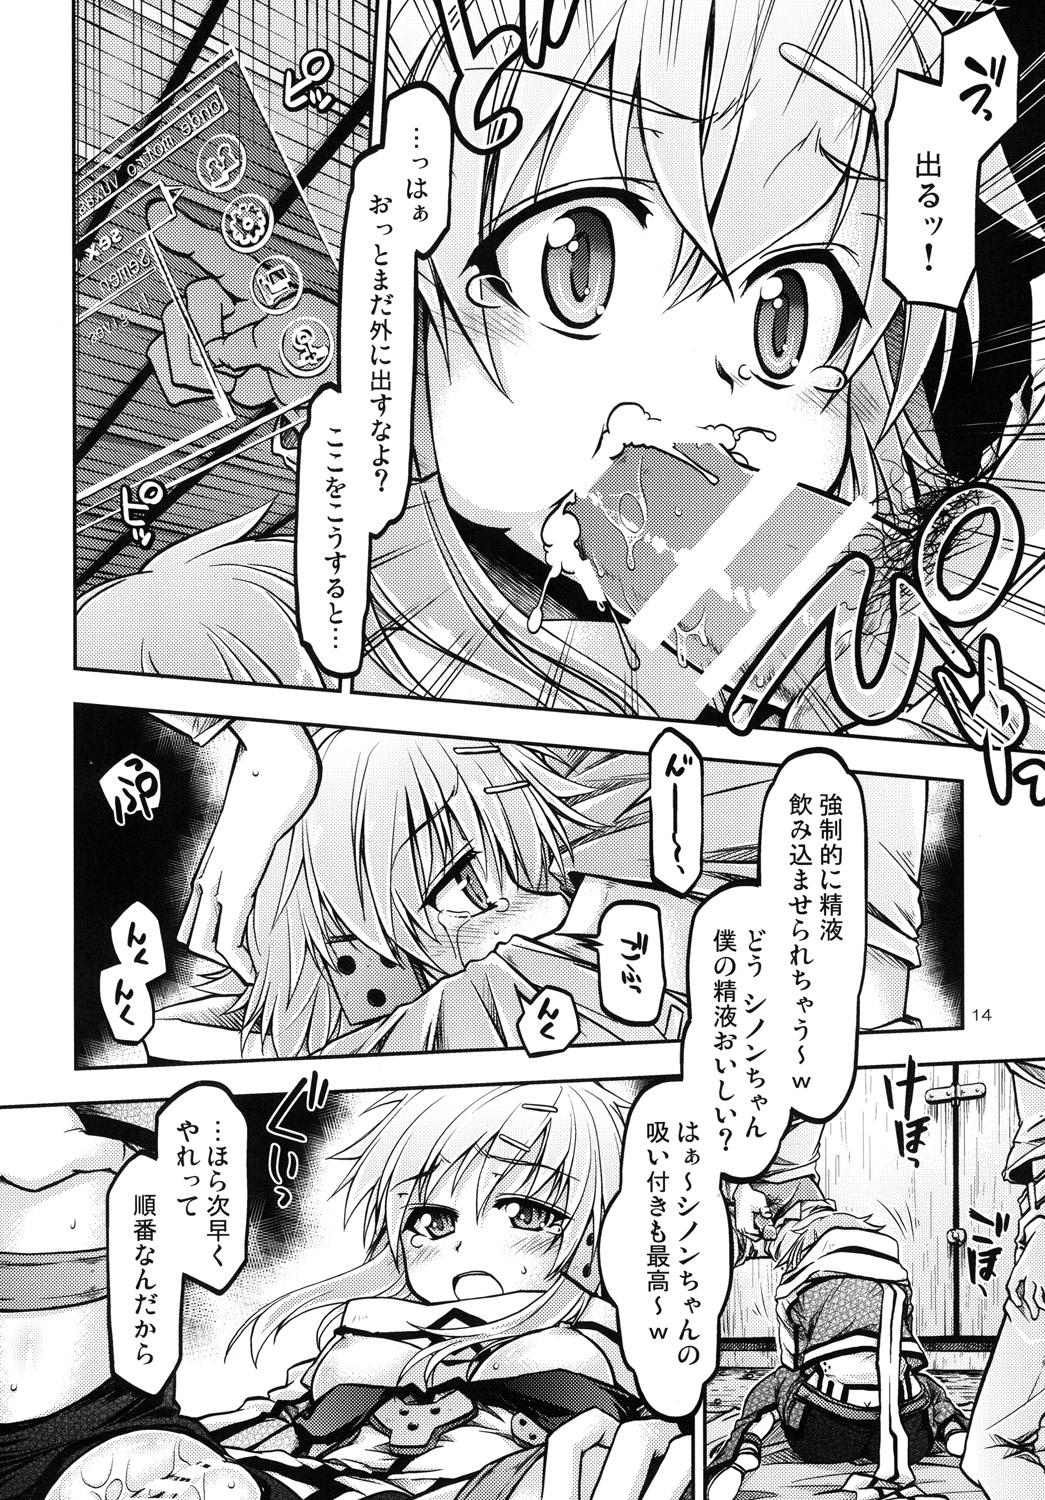 Moaning Gspot - Sword art online Gonzo - Page 13